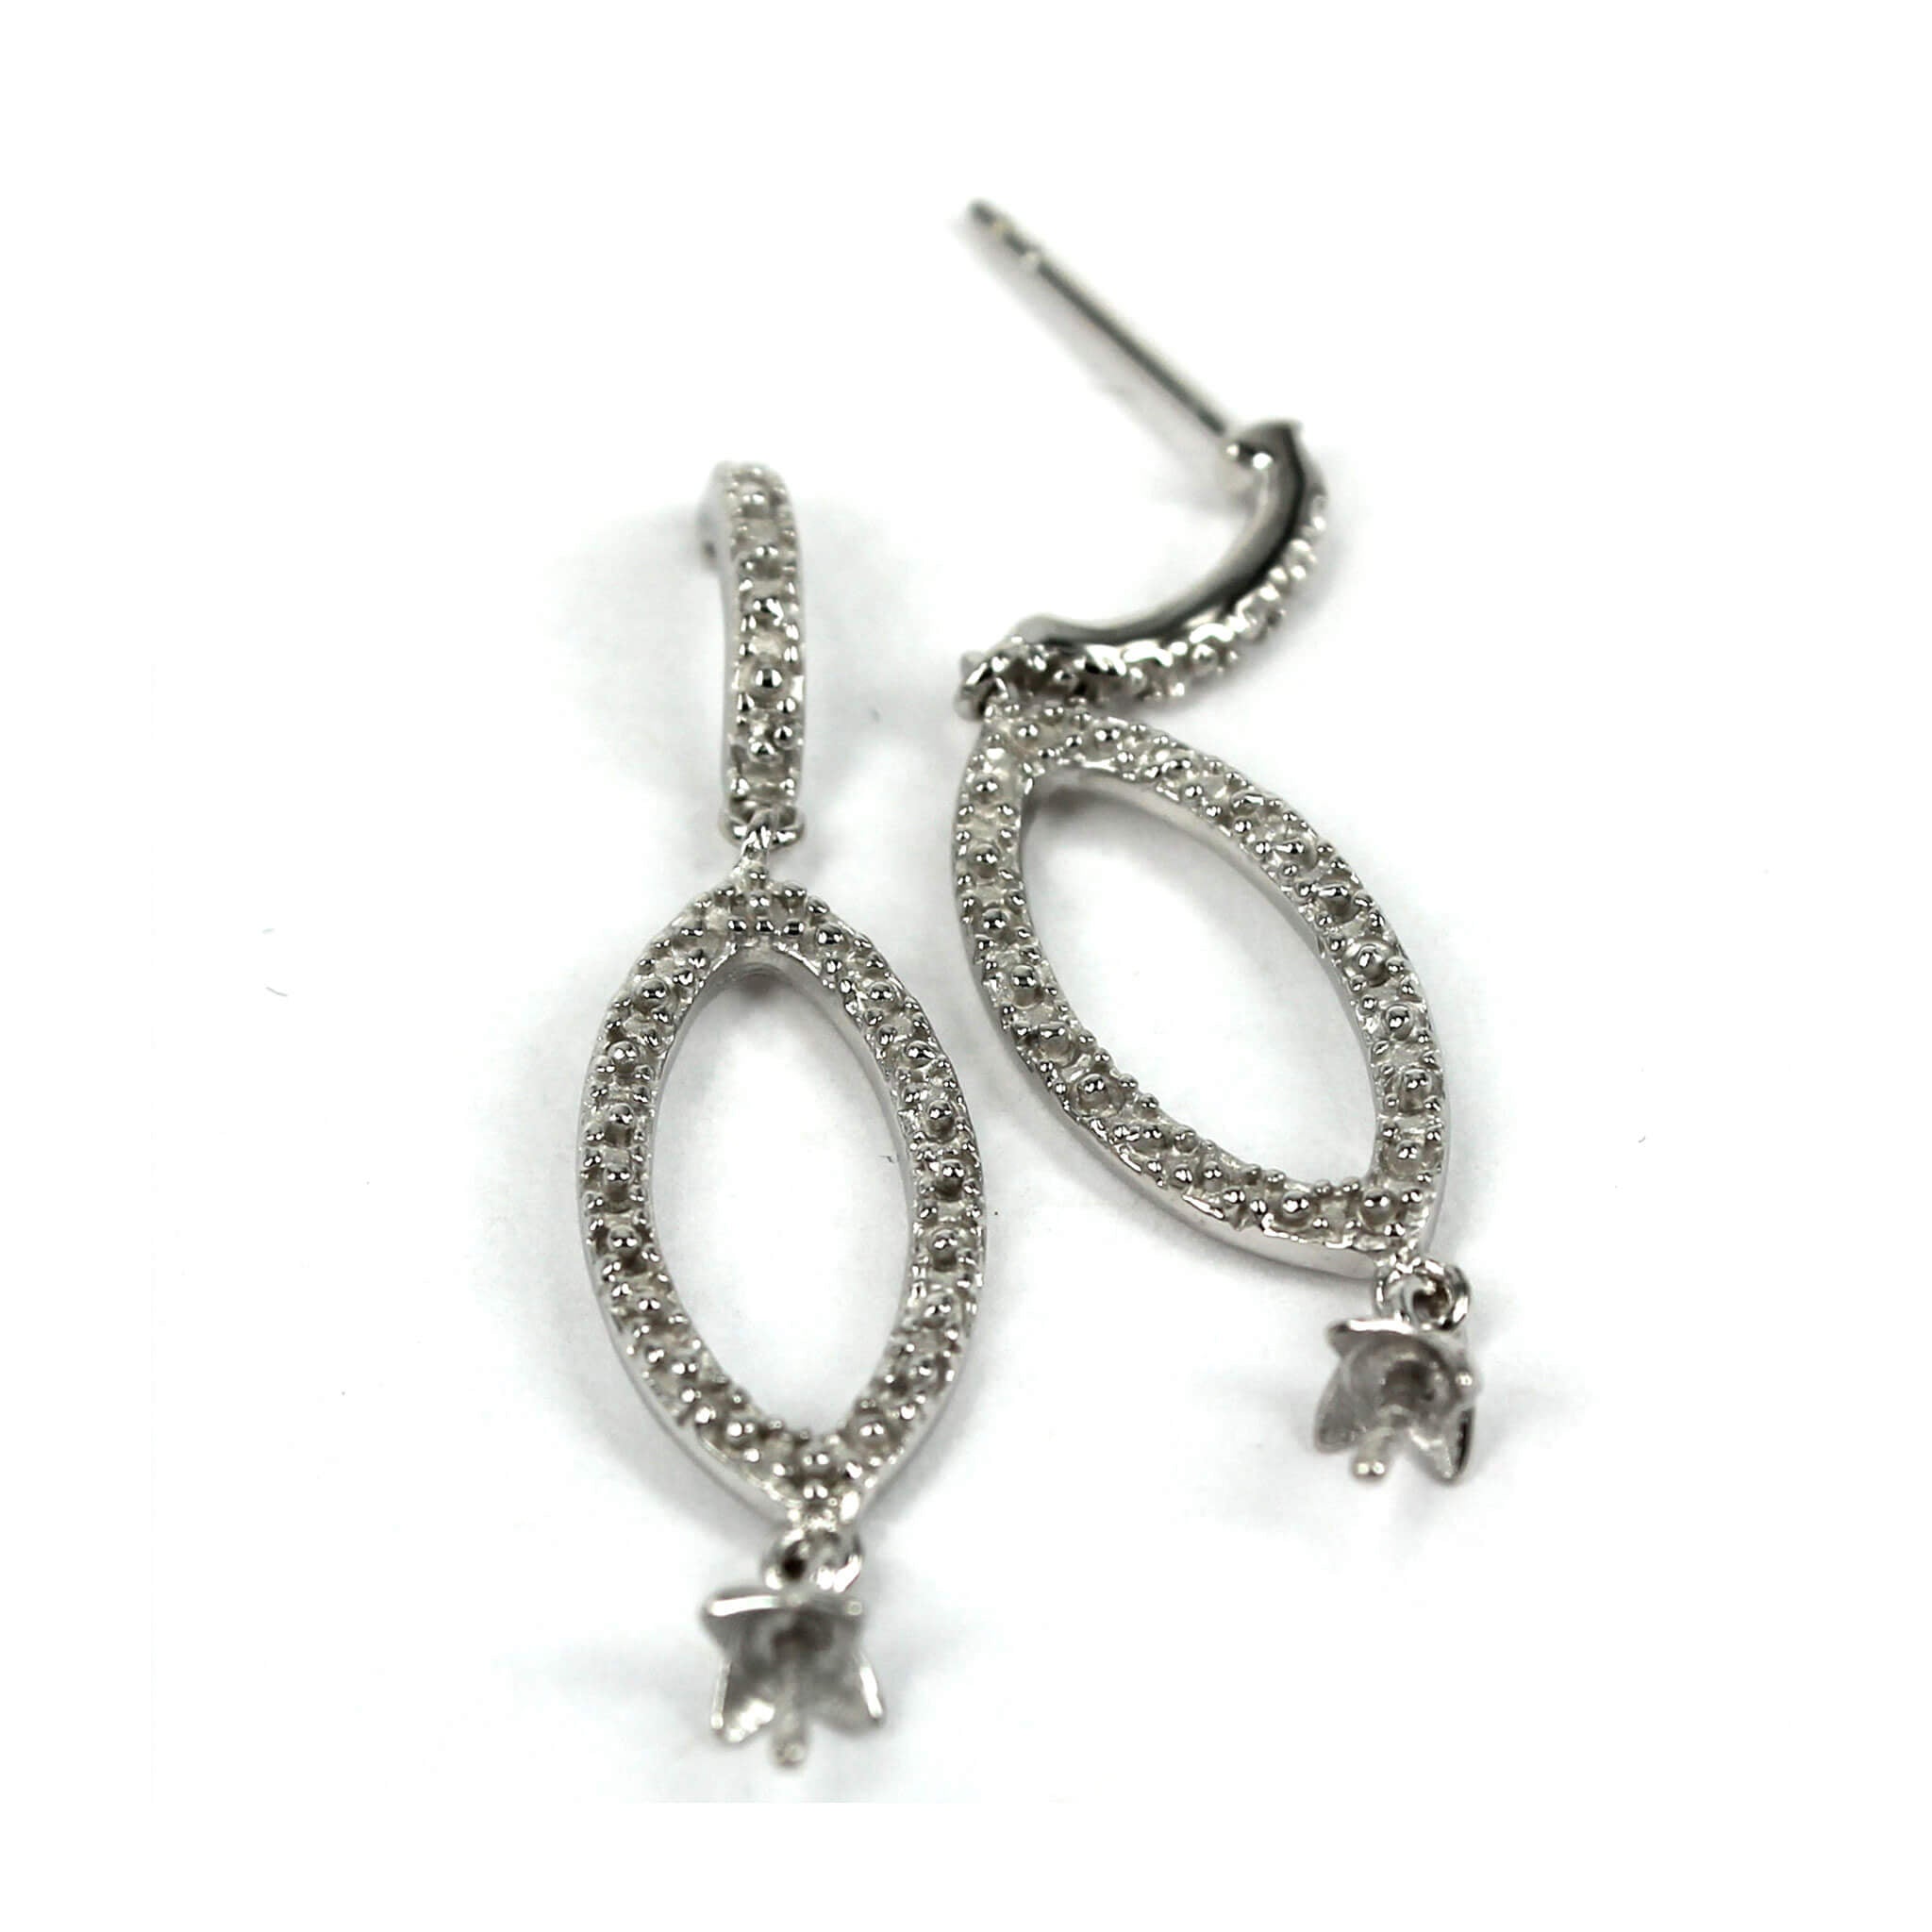 Ear Studs with Dangling Cup and Peg Mounting in Sterling Silver 3mm